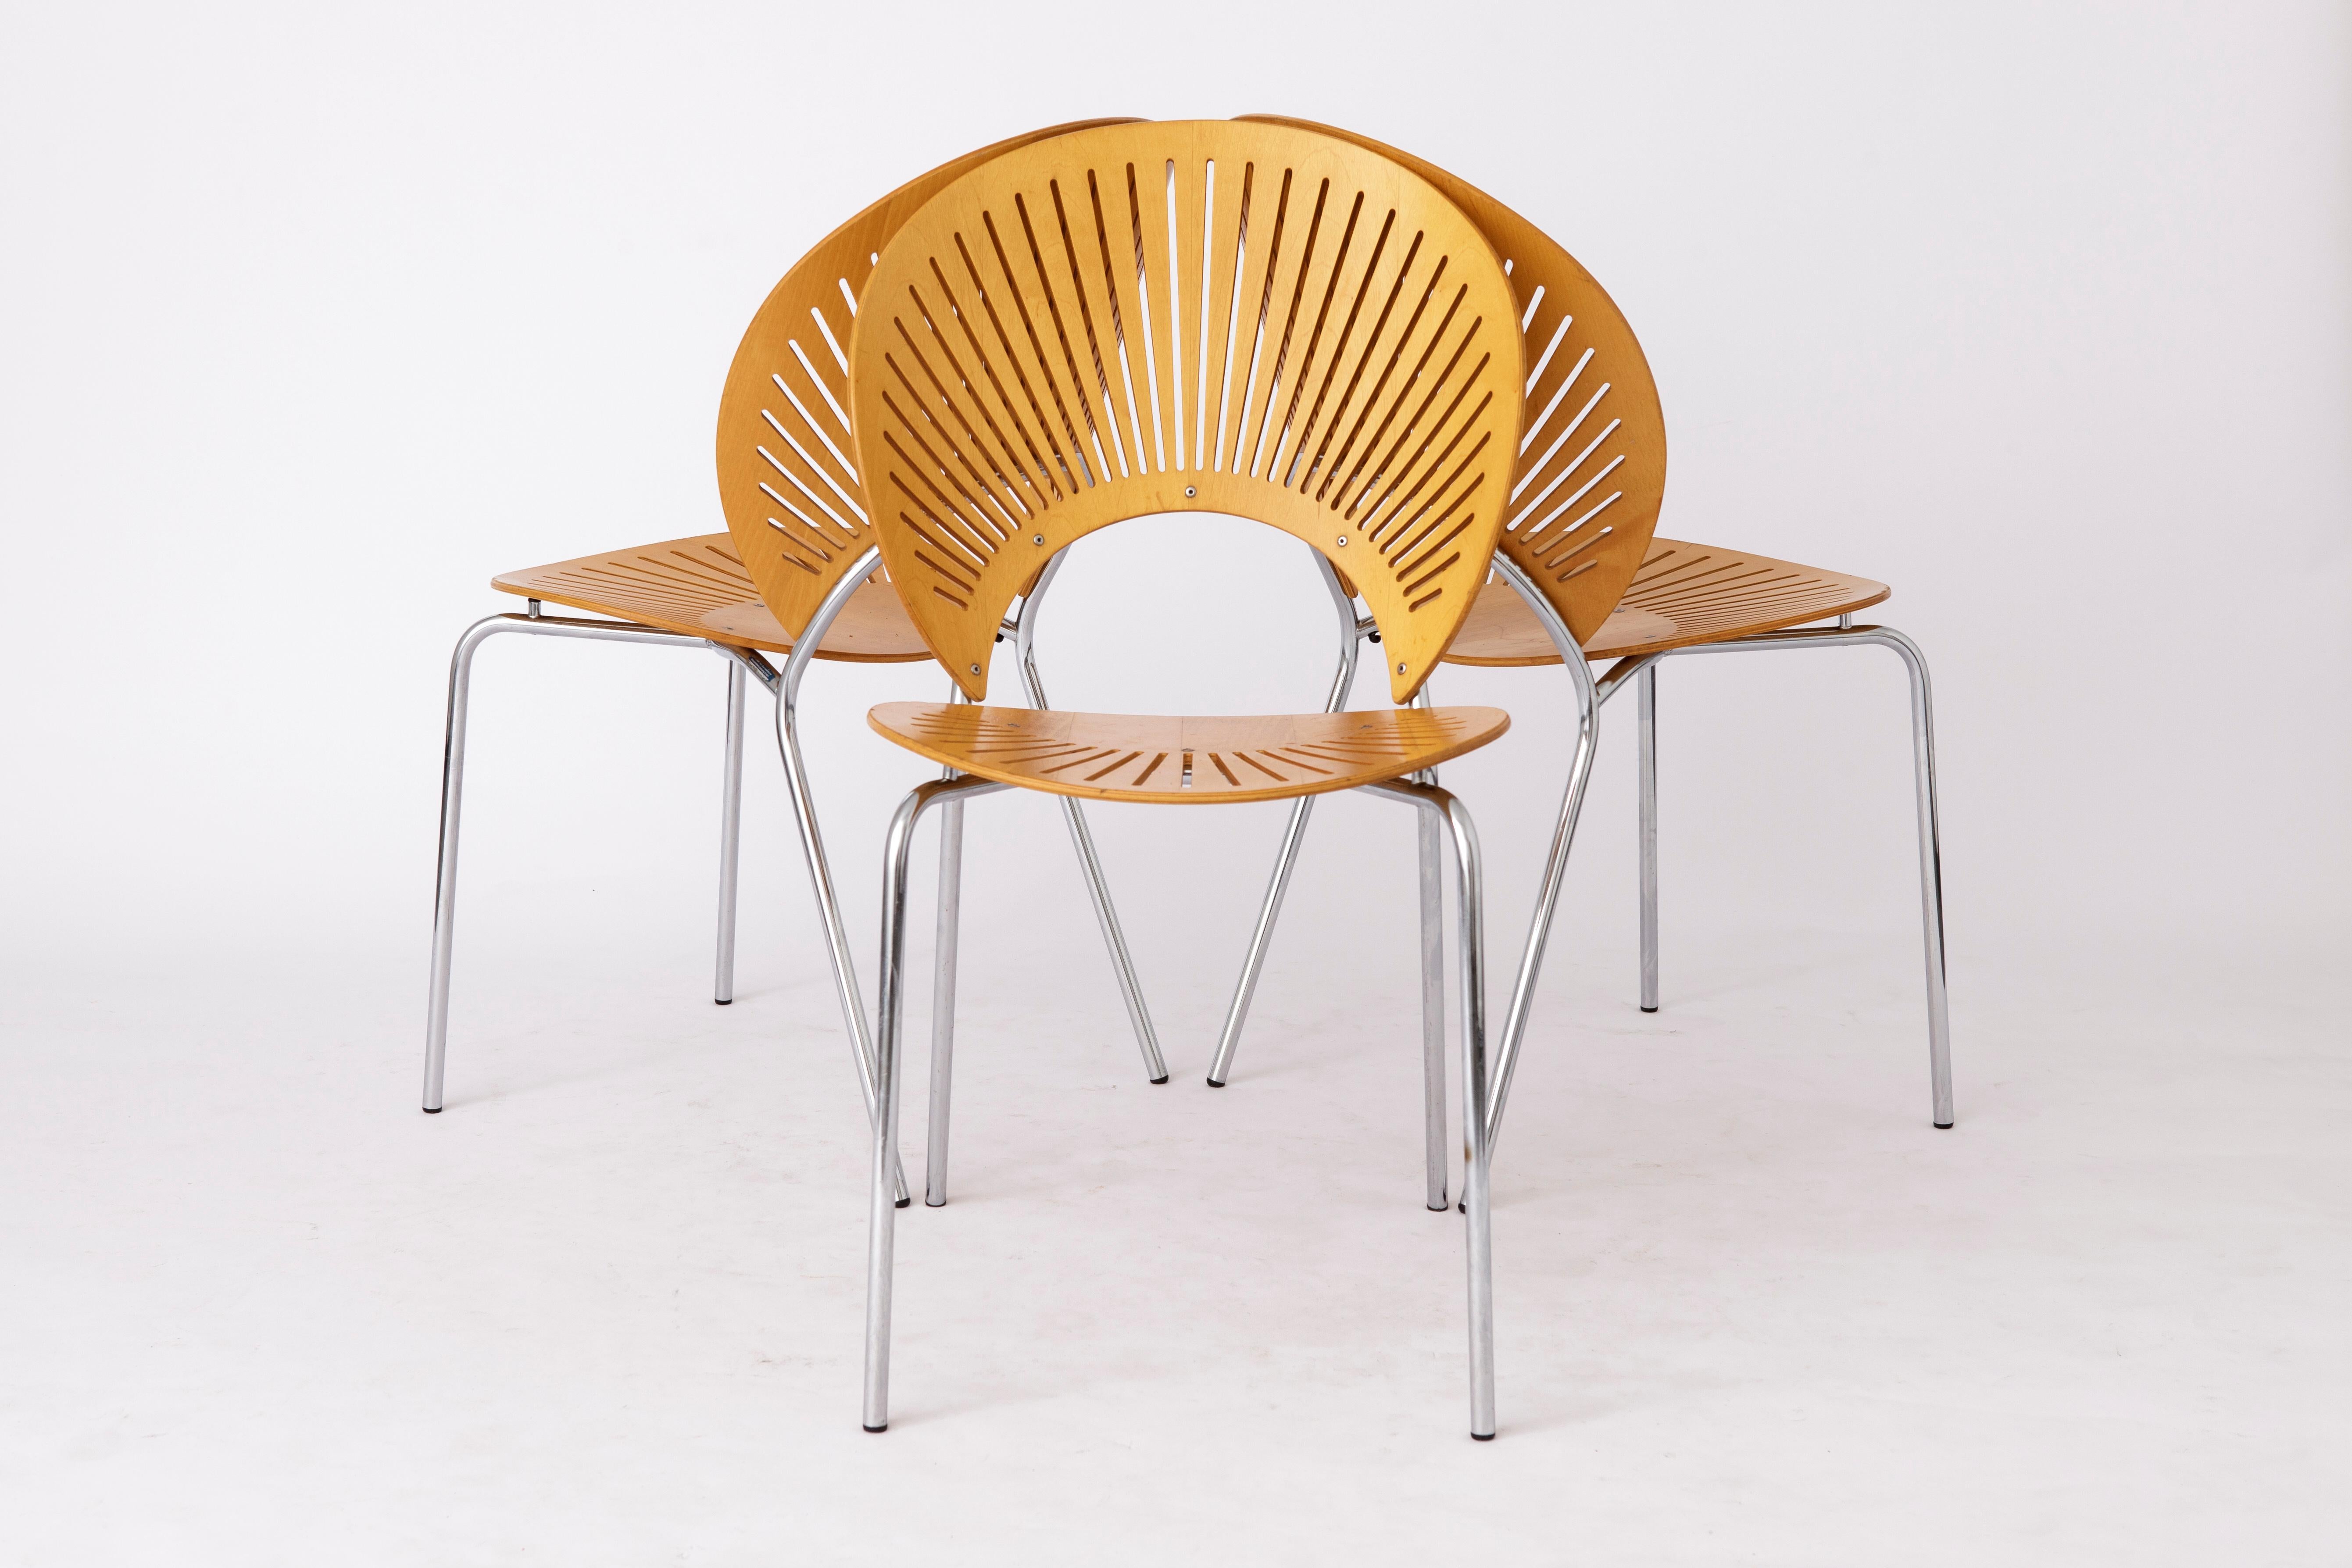 3 elegant dining chairs by Danish designer Nanna Ditzel in version beech wood. 
Model: Trinidad from 1993. 
Manufacturer: Fredericia, Denmark. 
Displayed price is for 3 chairs. 

The chairs are in very good condition. 
Metal frame and beech plywood